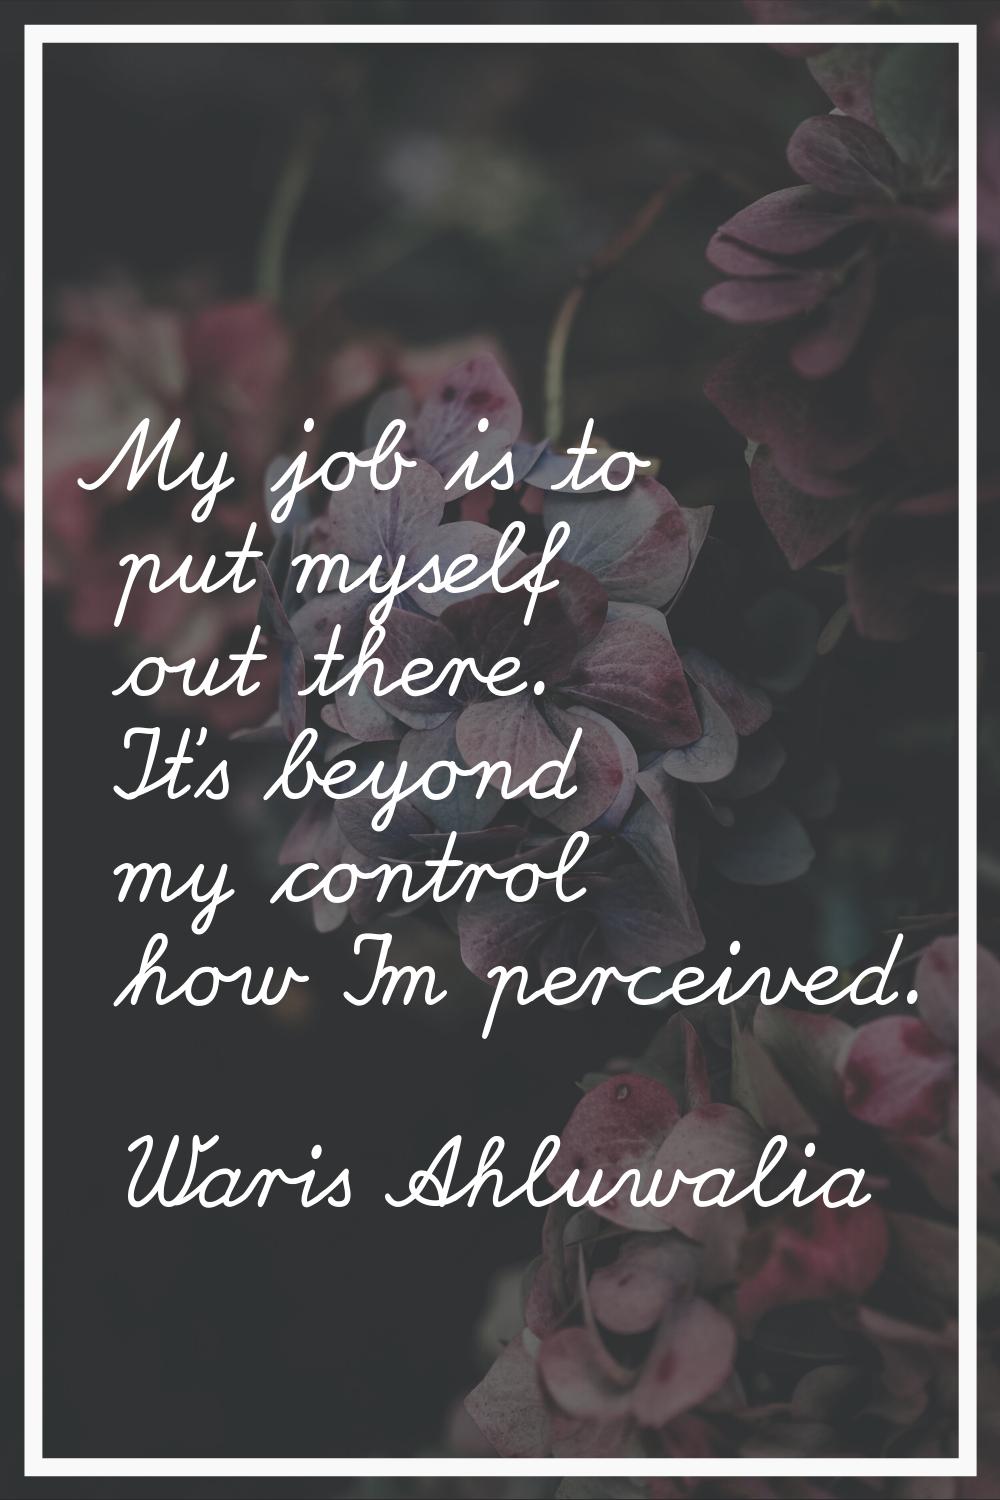 My job is to put myself out there. It's beyond my control how I'm perceived.